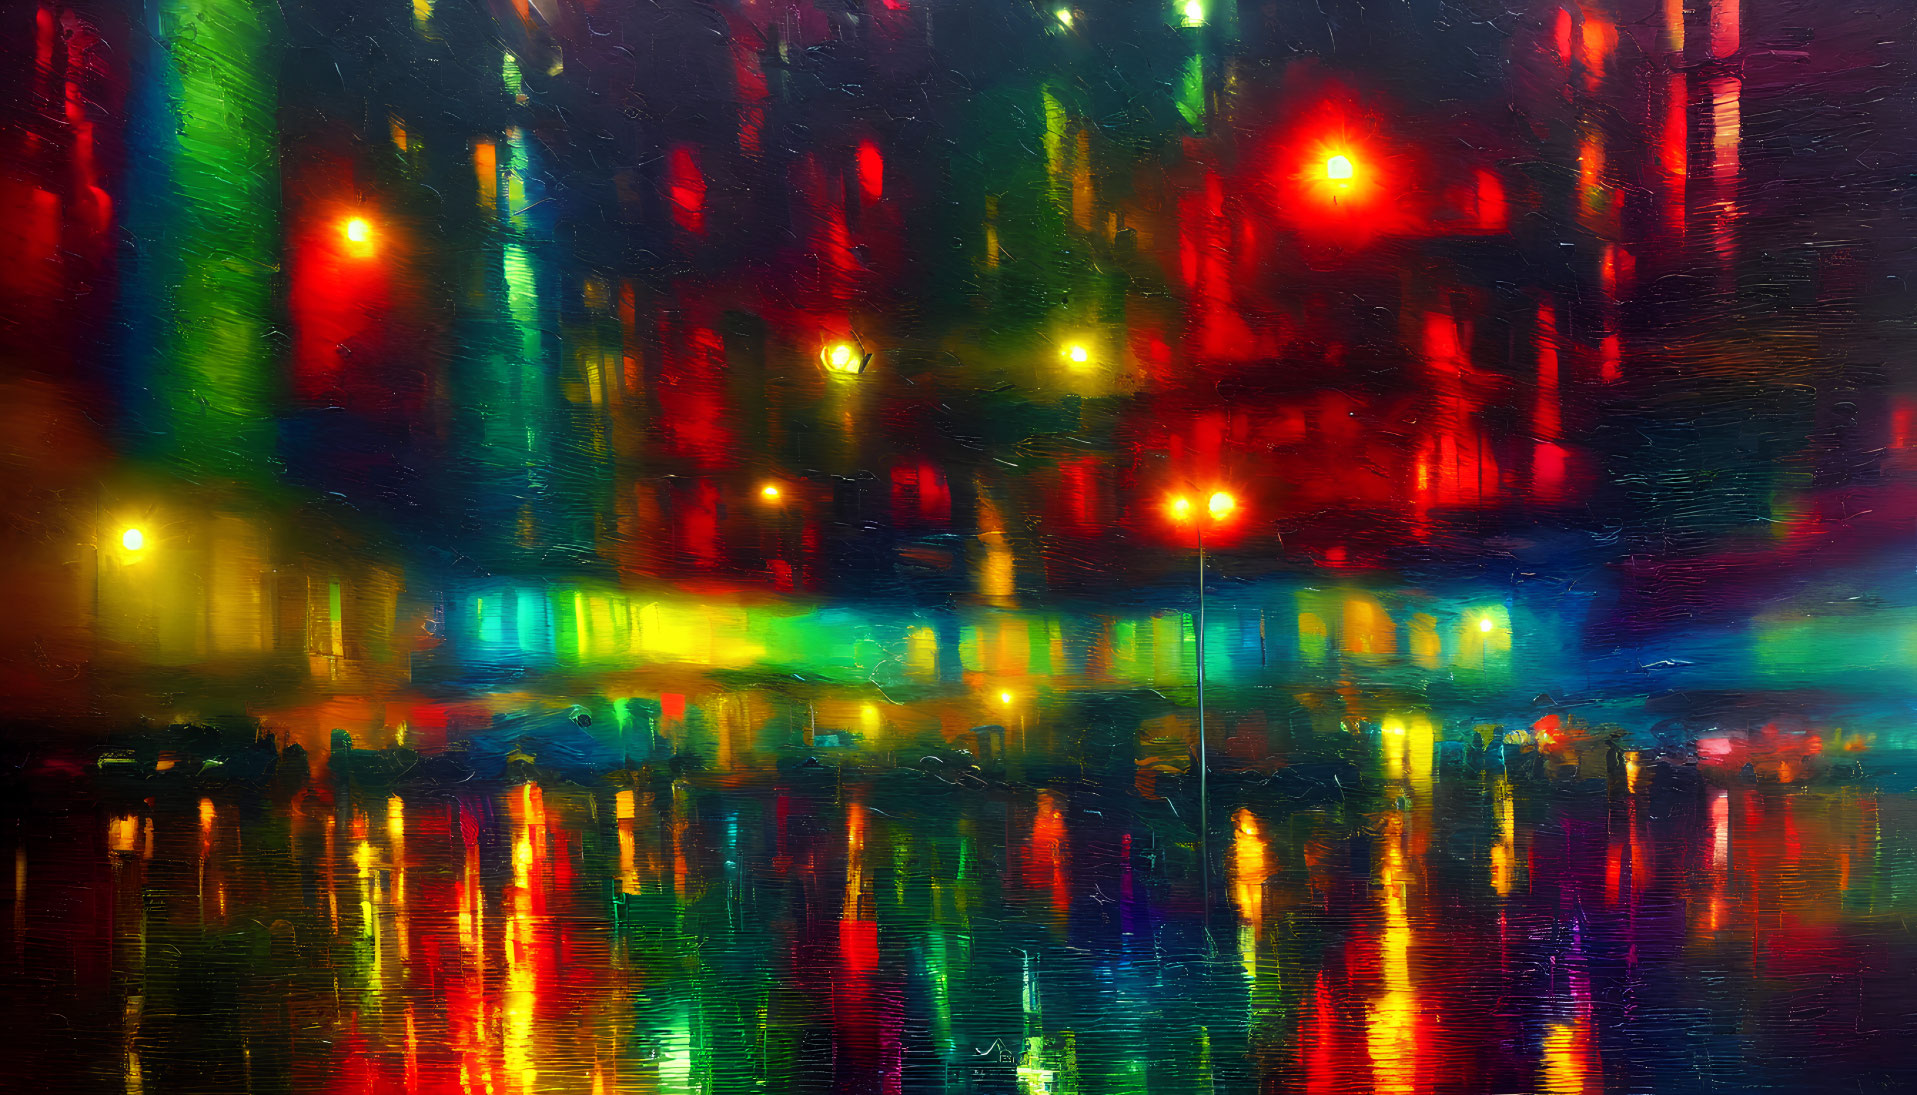 Colorful Abstract Cityscape Reflecting on Water at Night